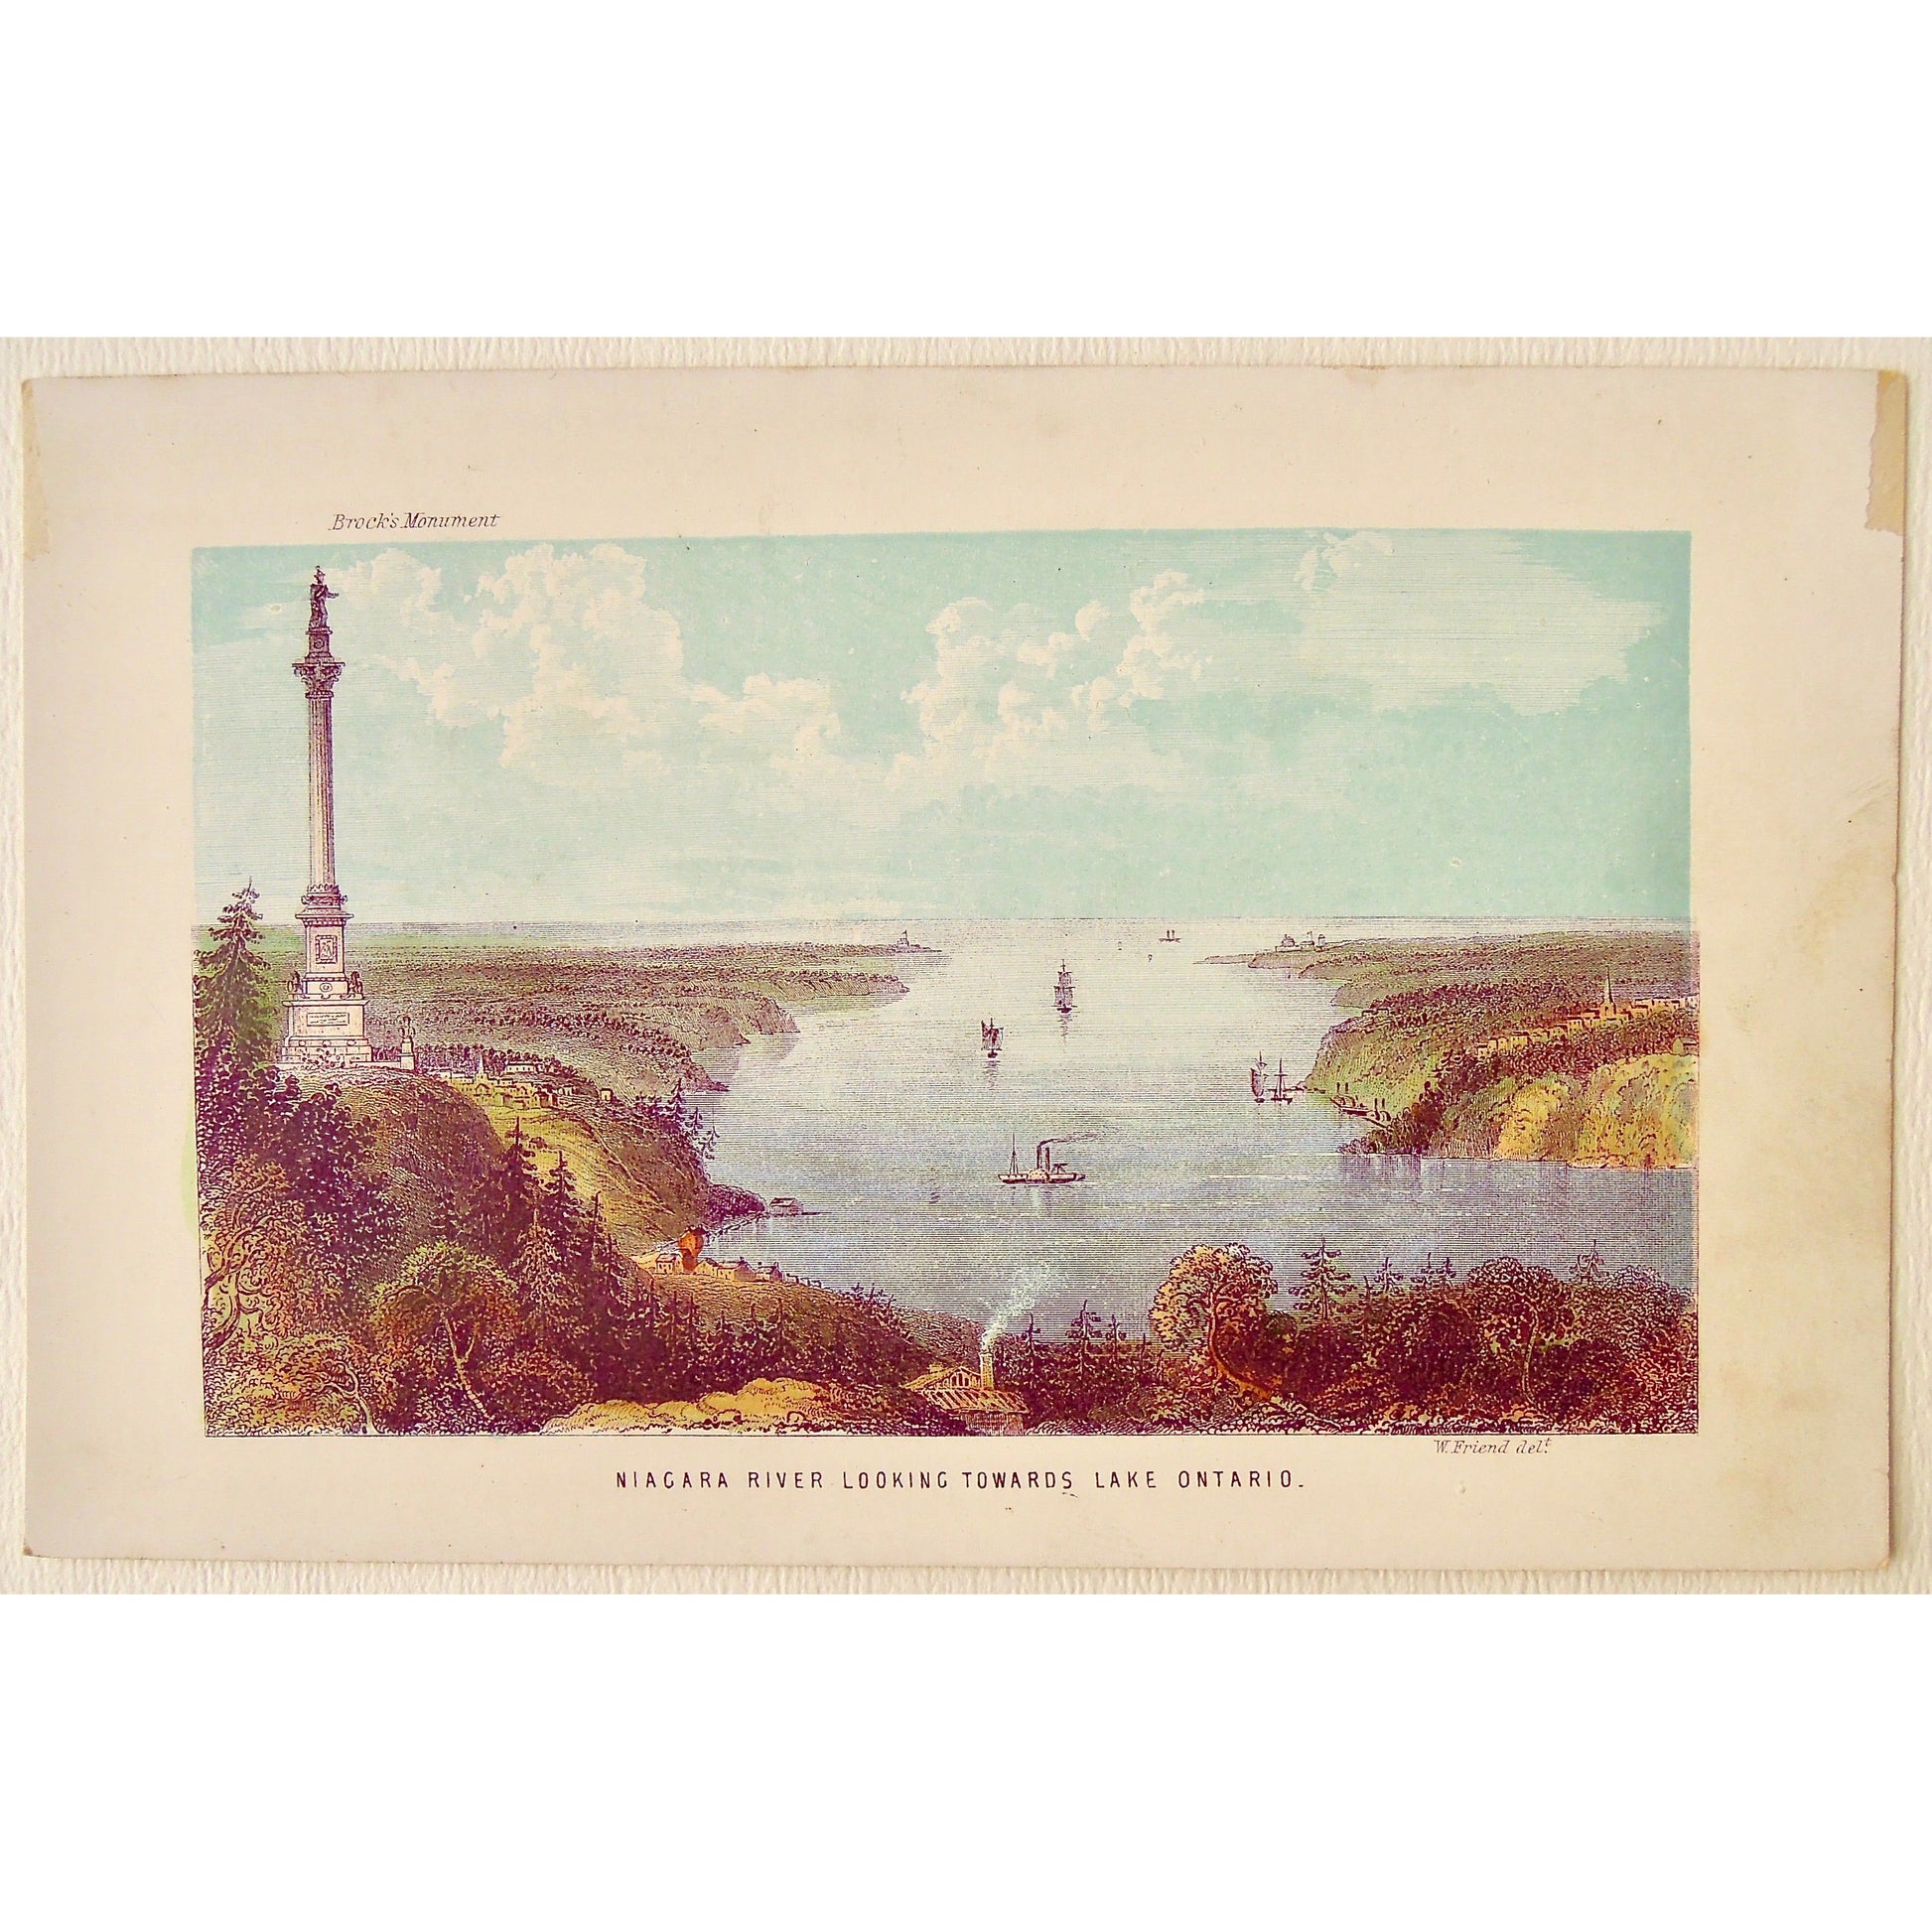 Original coloured antique print of Niagara River looking towards Lake Ontario including ships and Brock’s Monument by W. Friends by Thomas Nelson & Sons 1858 for sale by Victoria Cooper Antique Prints